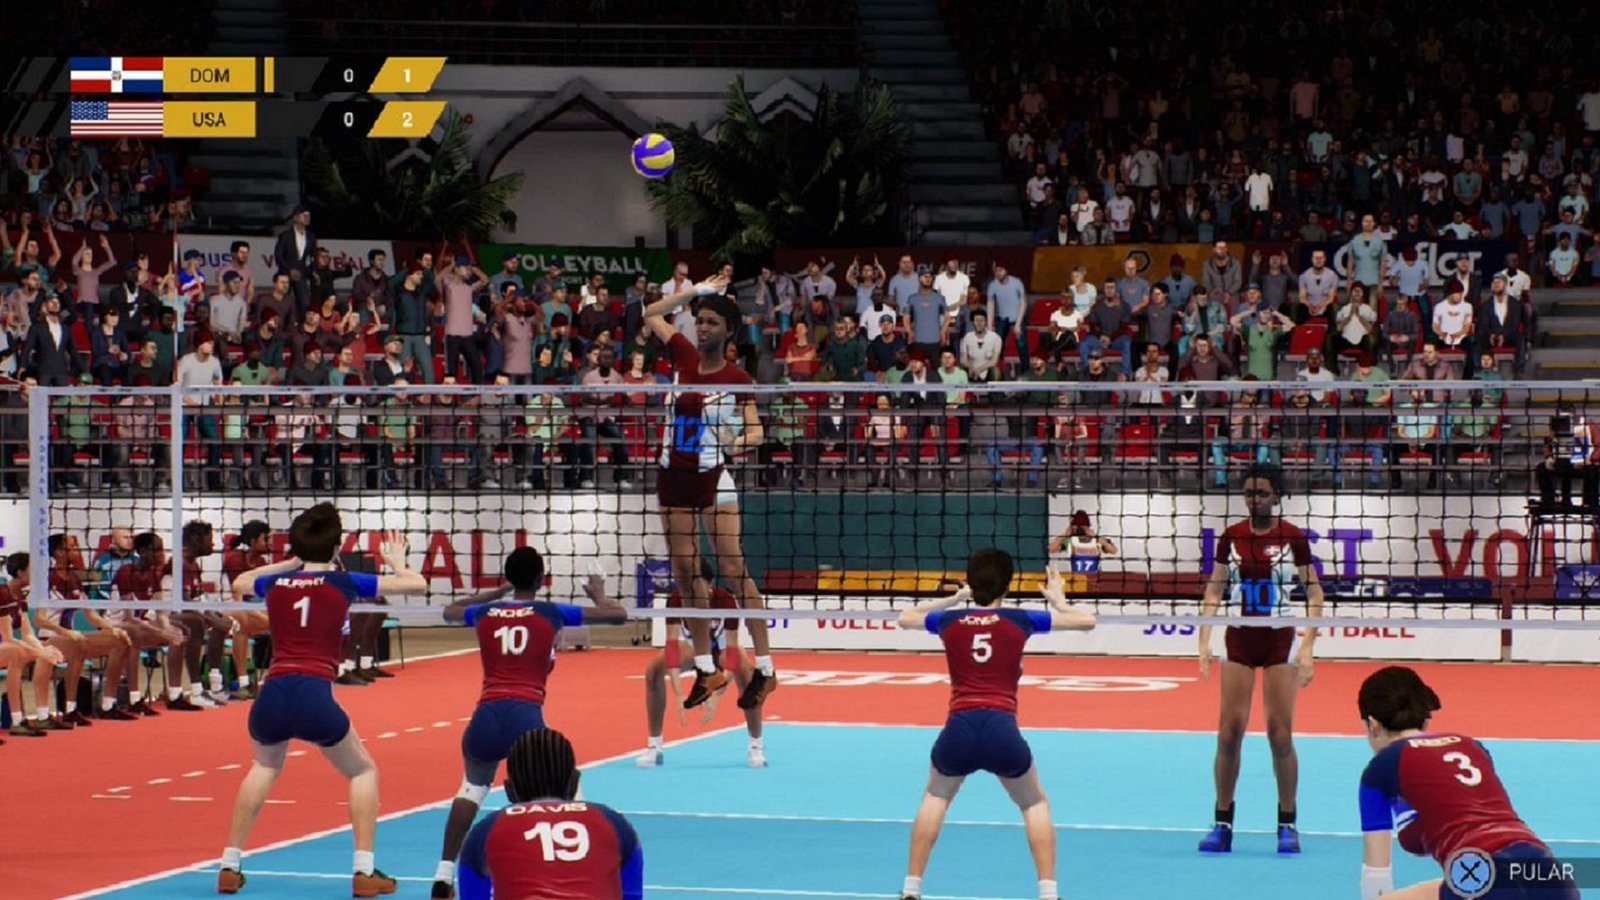 Review – Spike Volleyball